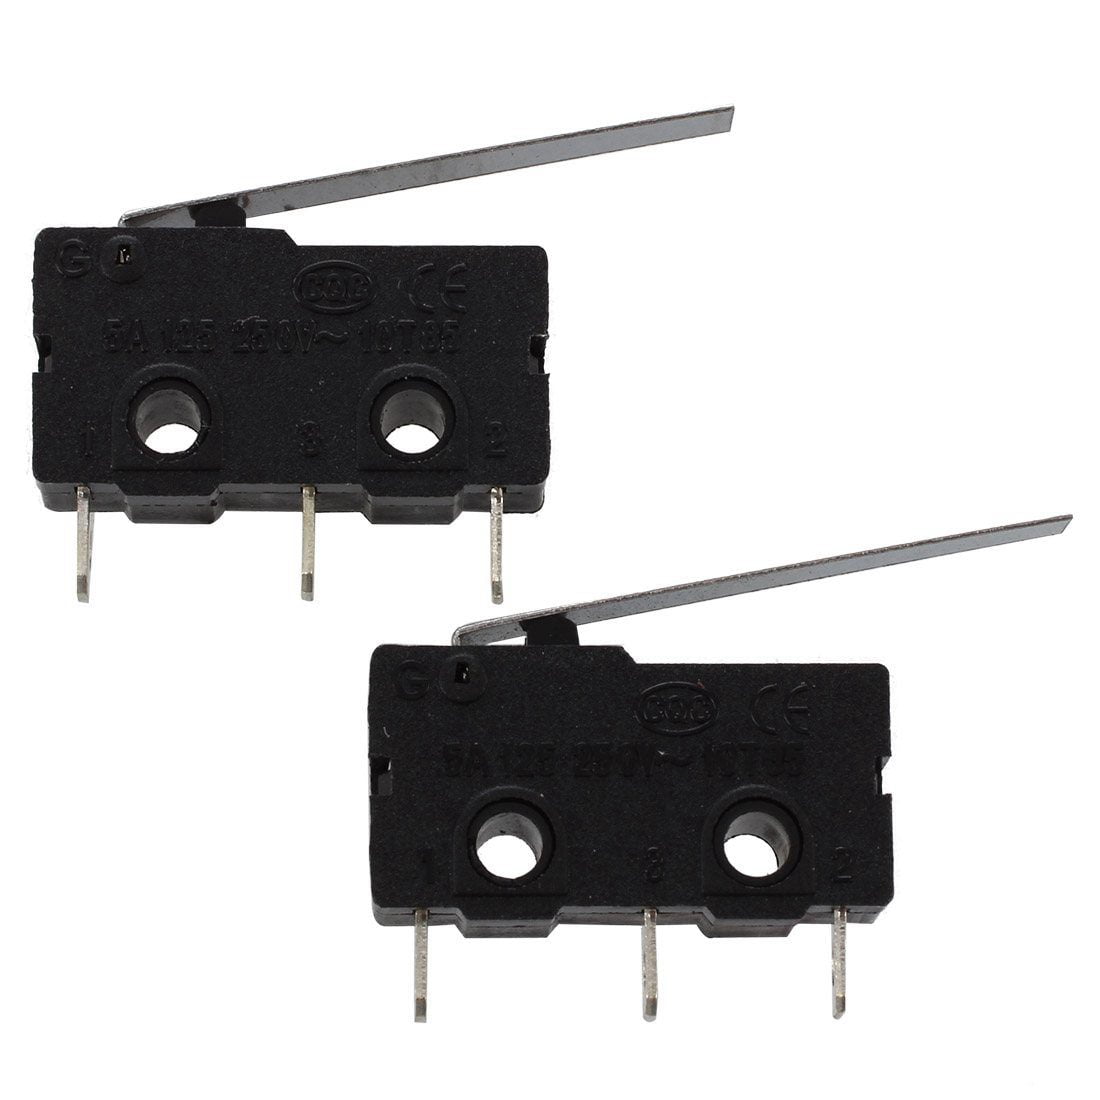 2 PACK -- Electrical Engineering Supply Micro Limit Switch Long Arm 